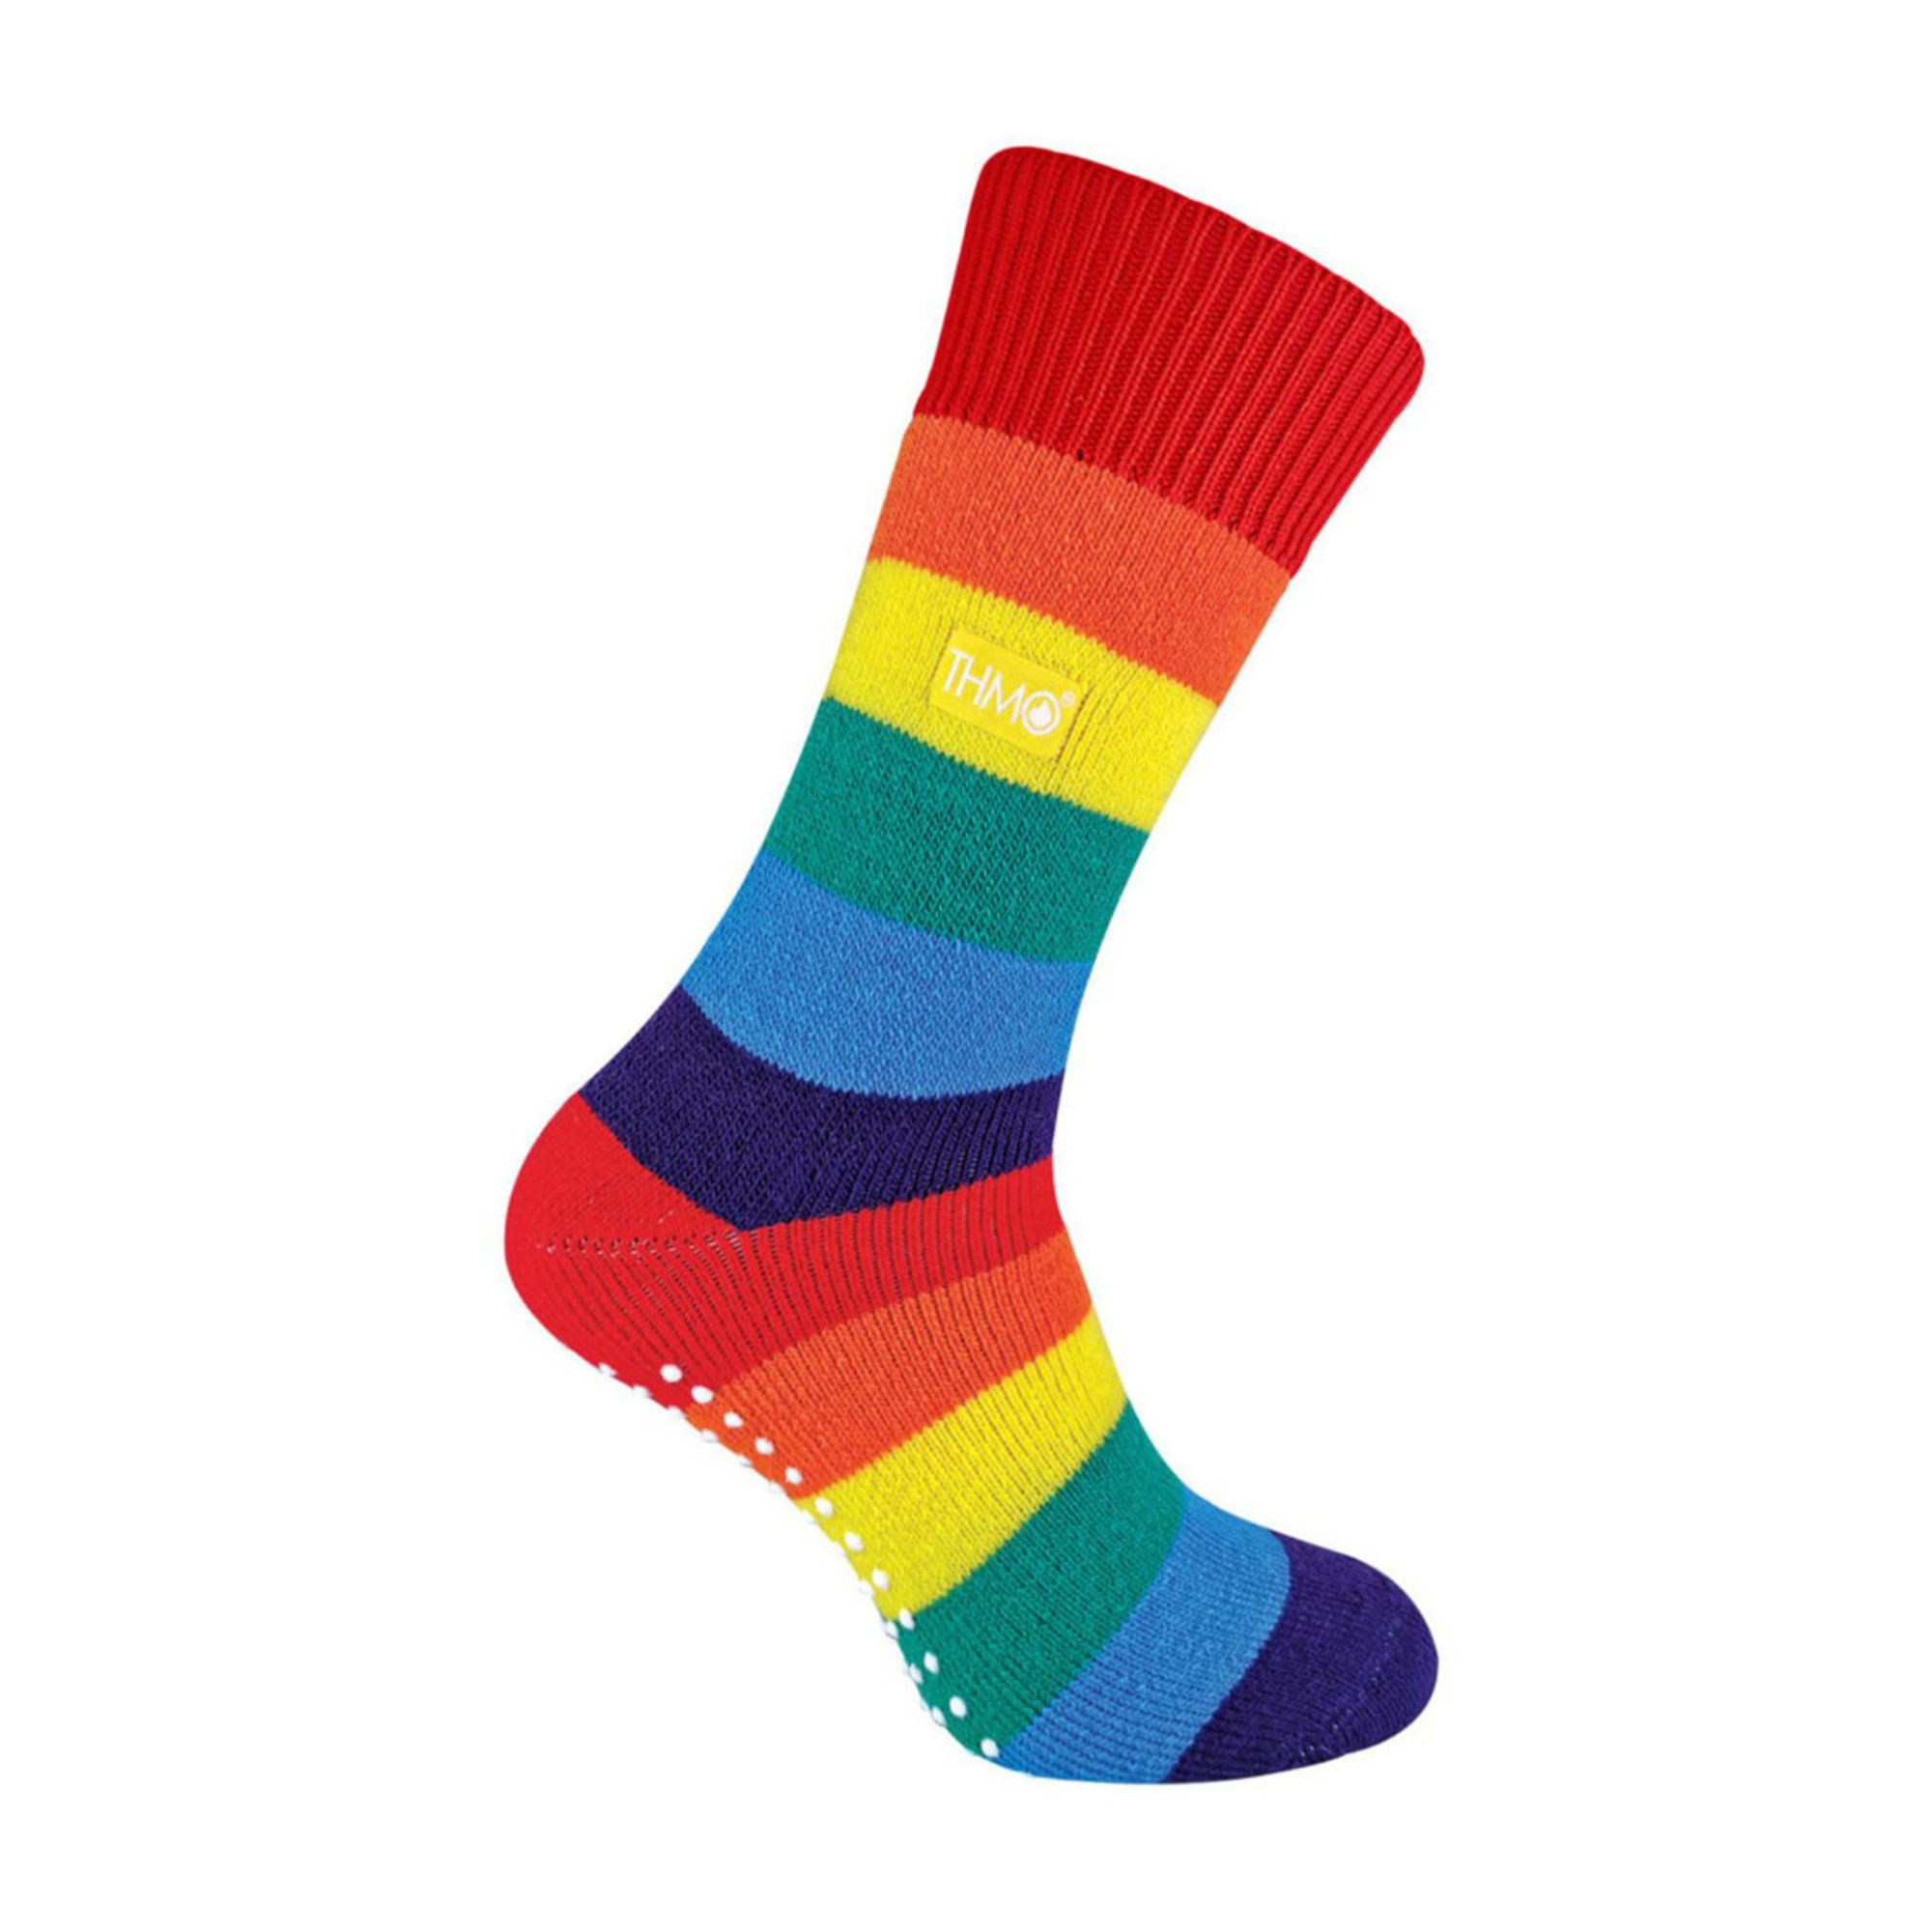 Colourful Striped Rainbow Thermal Socks for Warmth by THMO